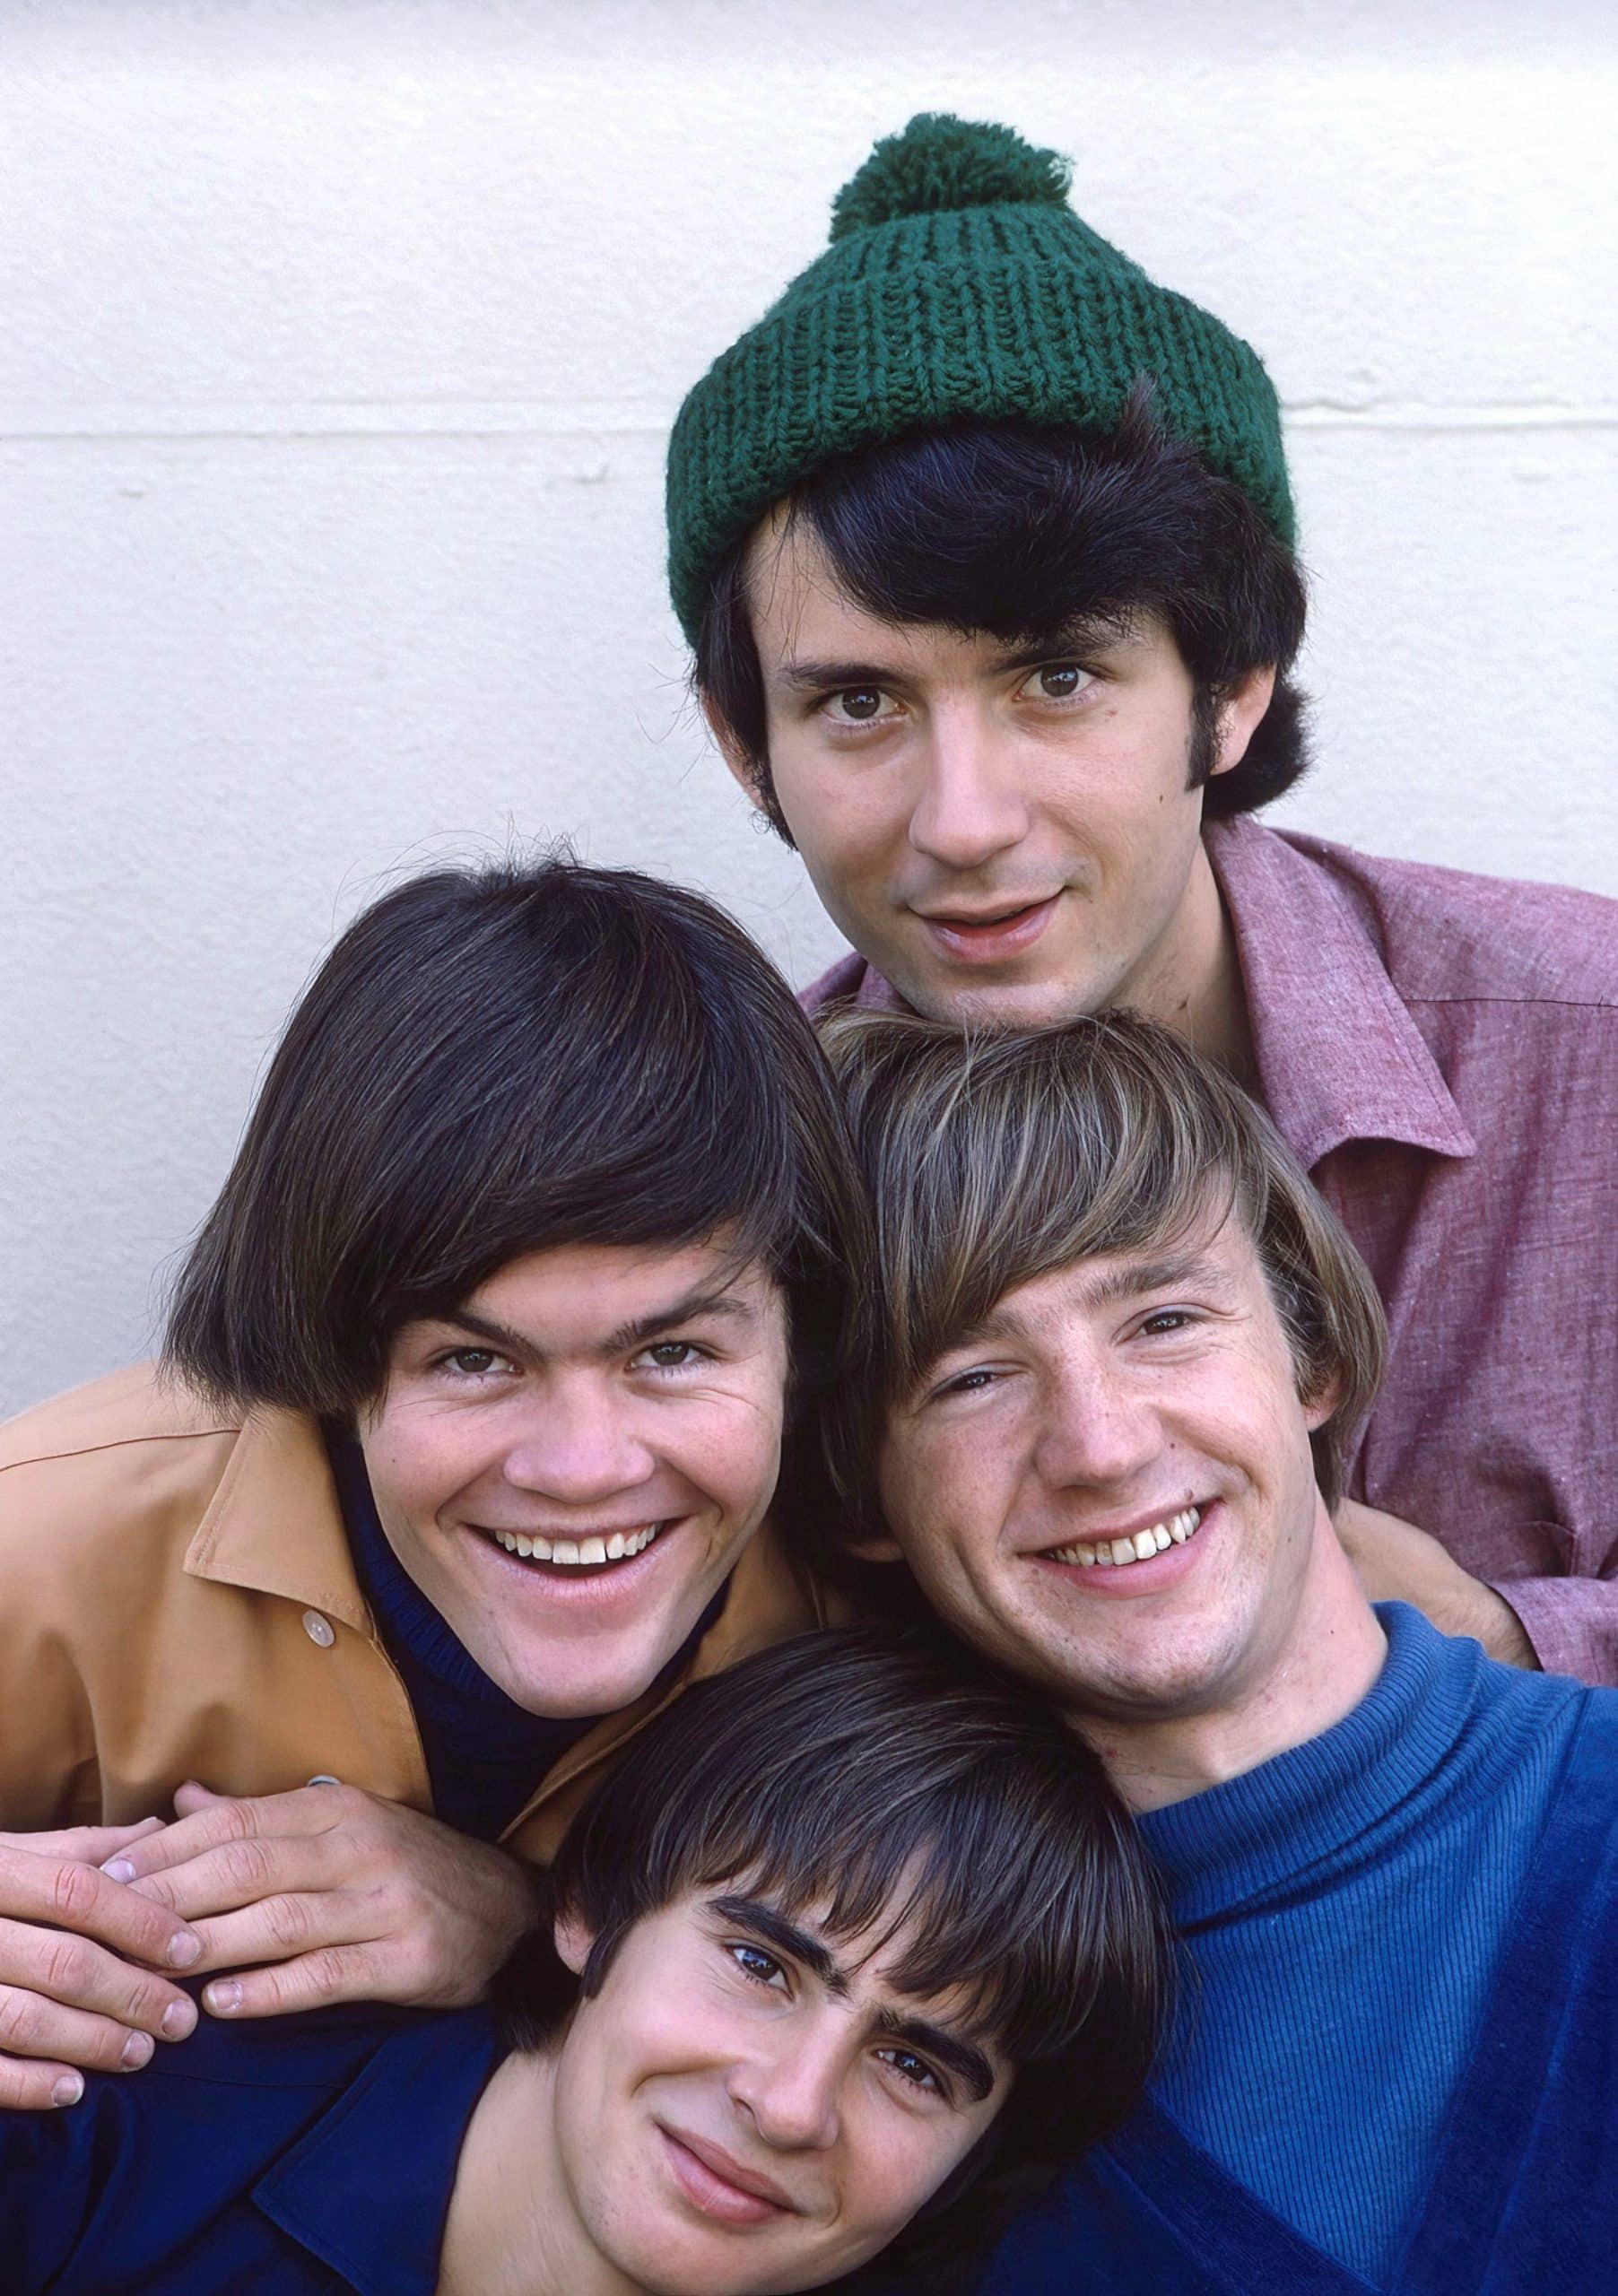 THE MONKEES, clockwise from top, Mike Nesmith, Peter Tork, Davy Jones, Mickey Dolenz, 1966-1968